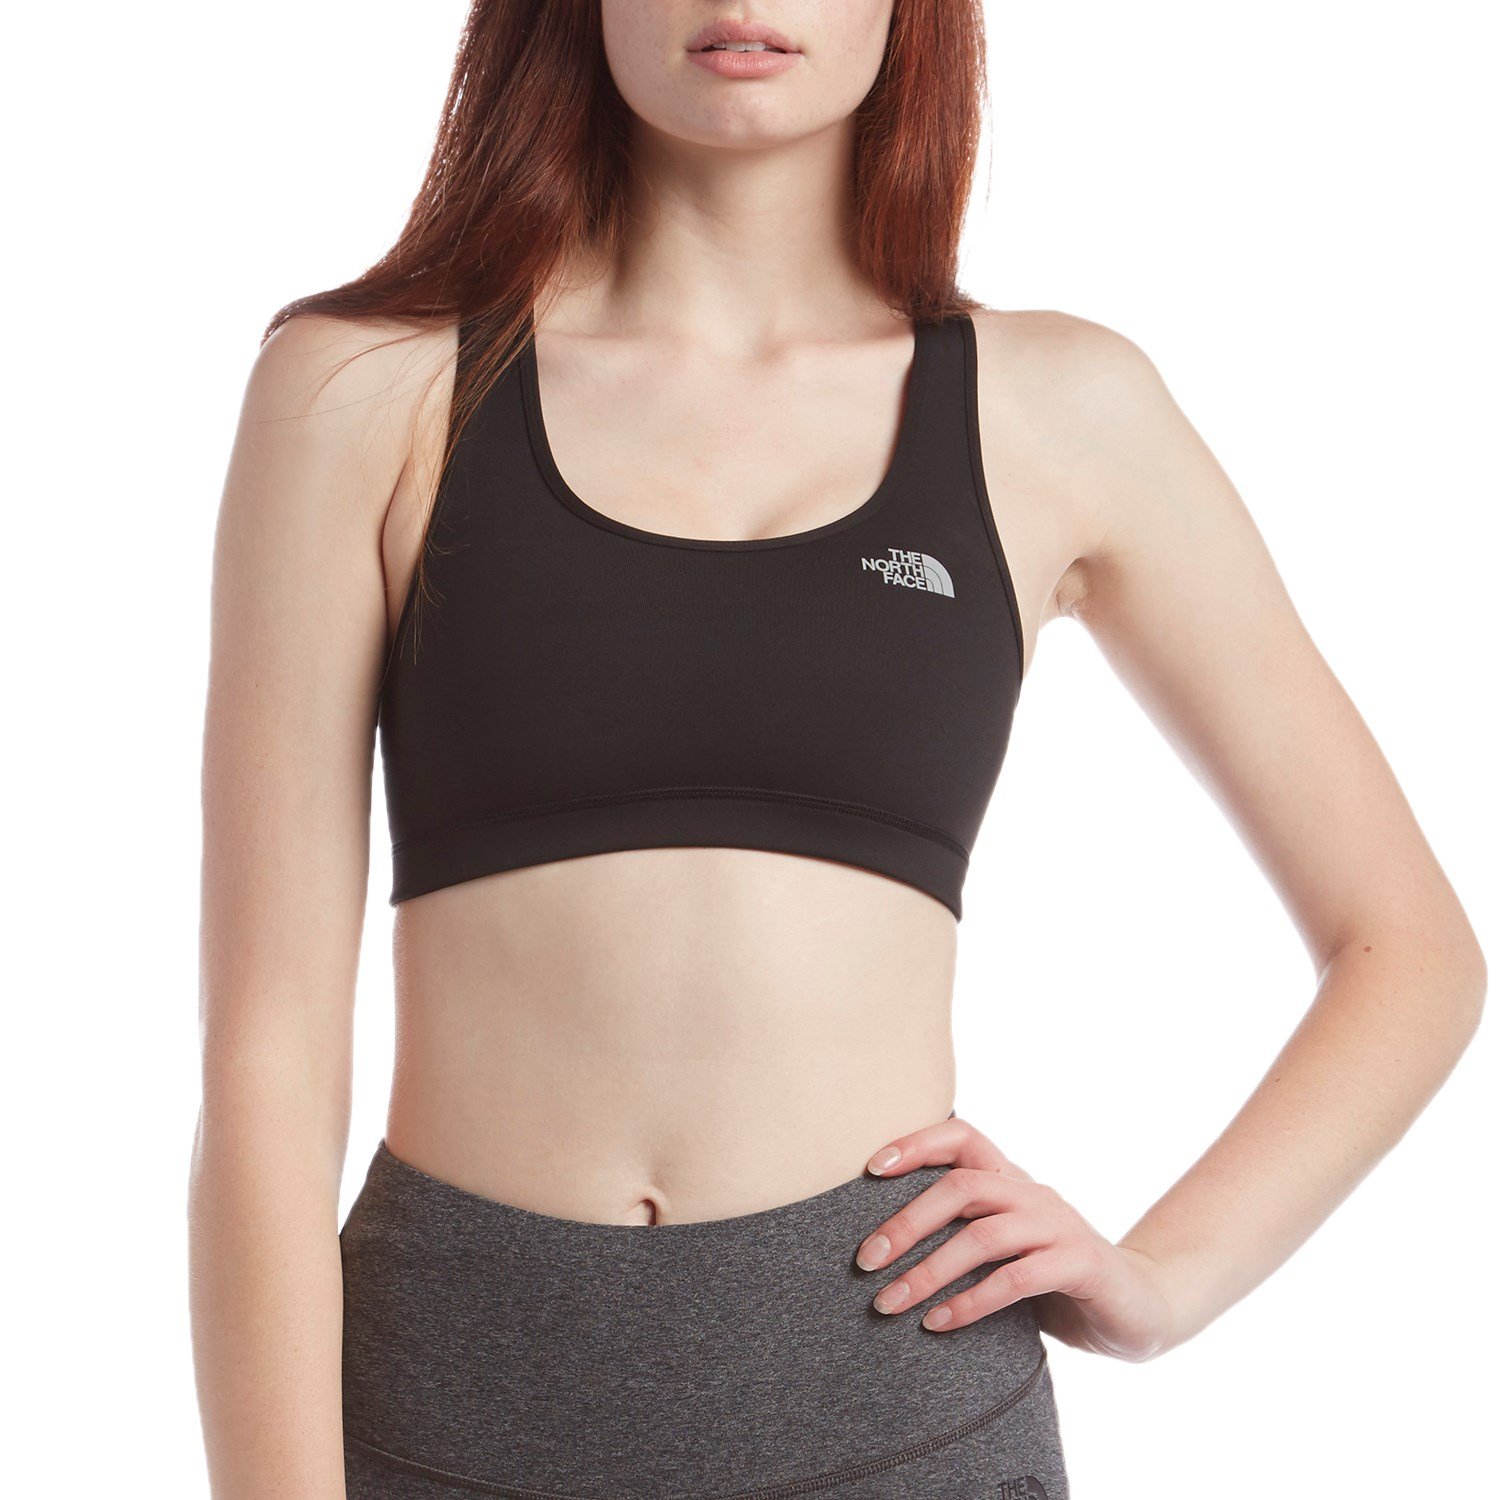 The North Face VaporWick Sports Bra - White, Excellent condition